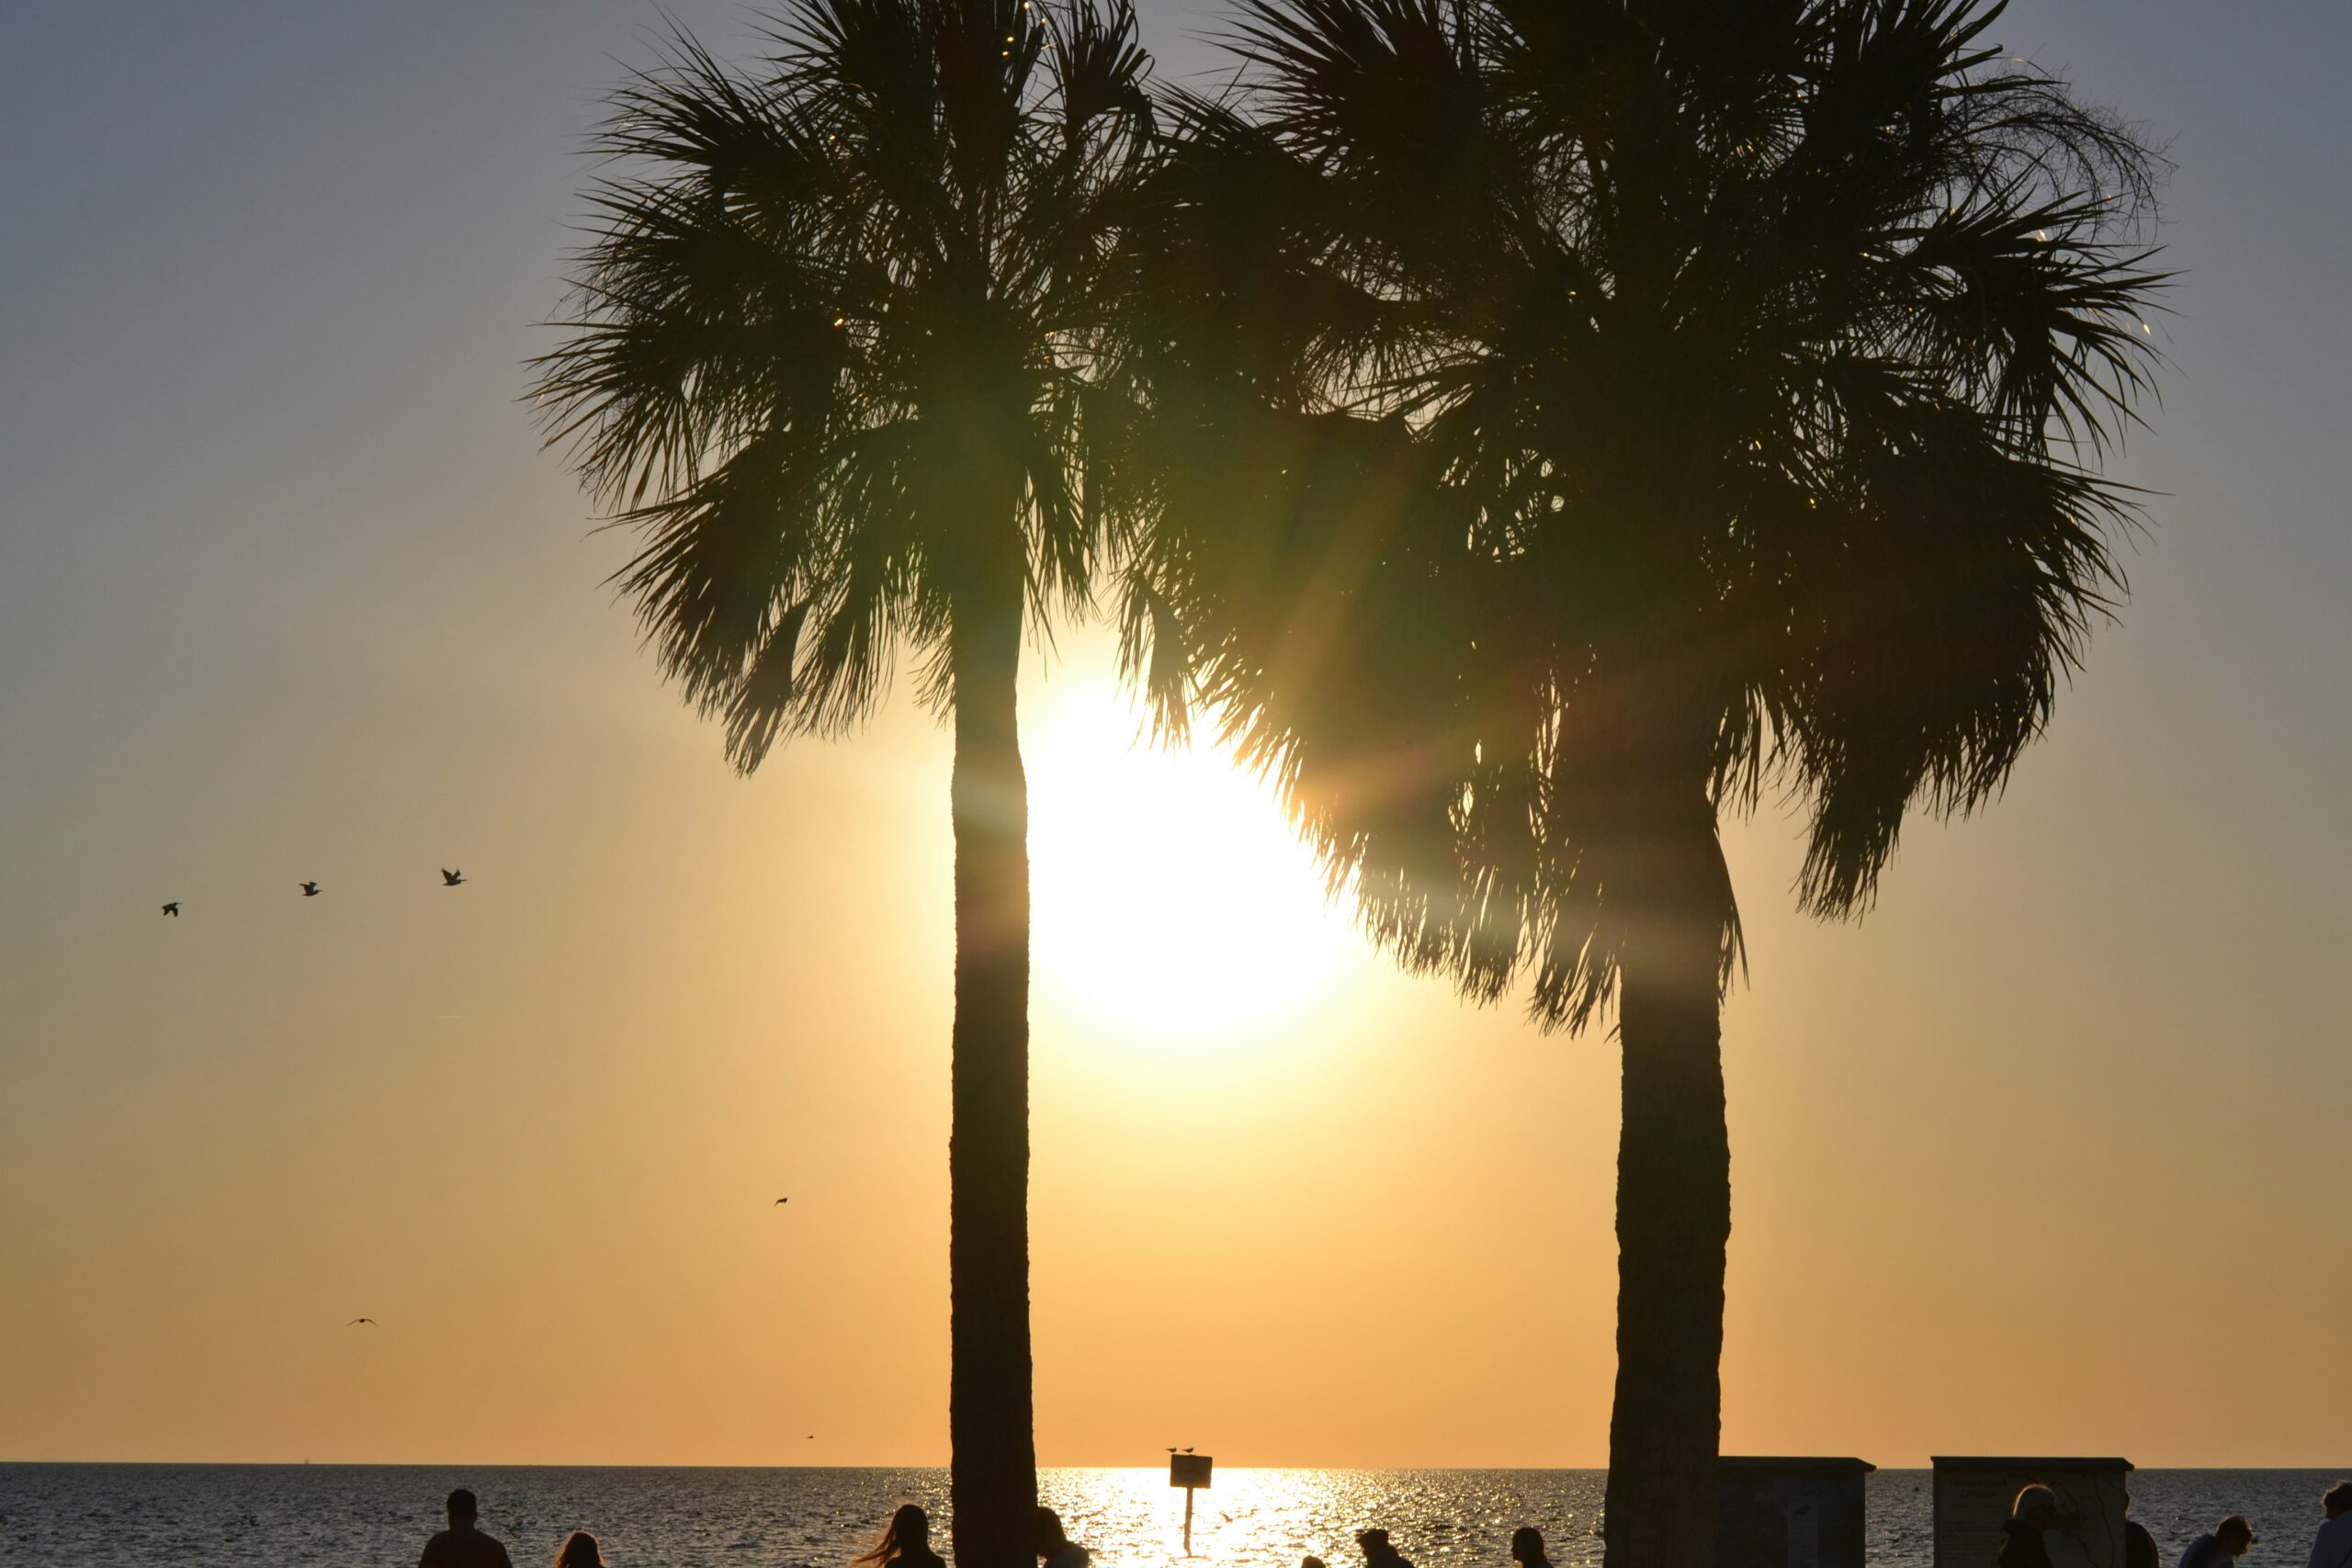 Tallahassee is one of the cheapest places to live in Florida for young professionals. Pictured: Palm trees on the beach